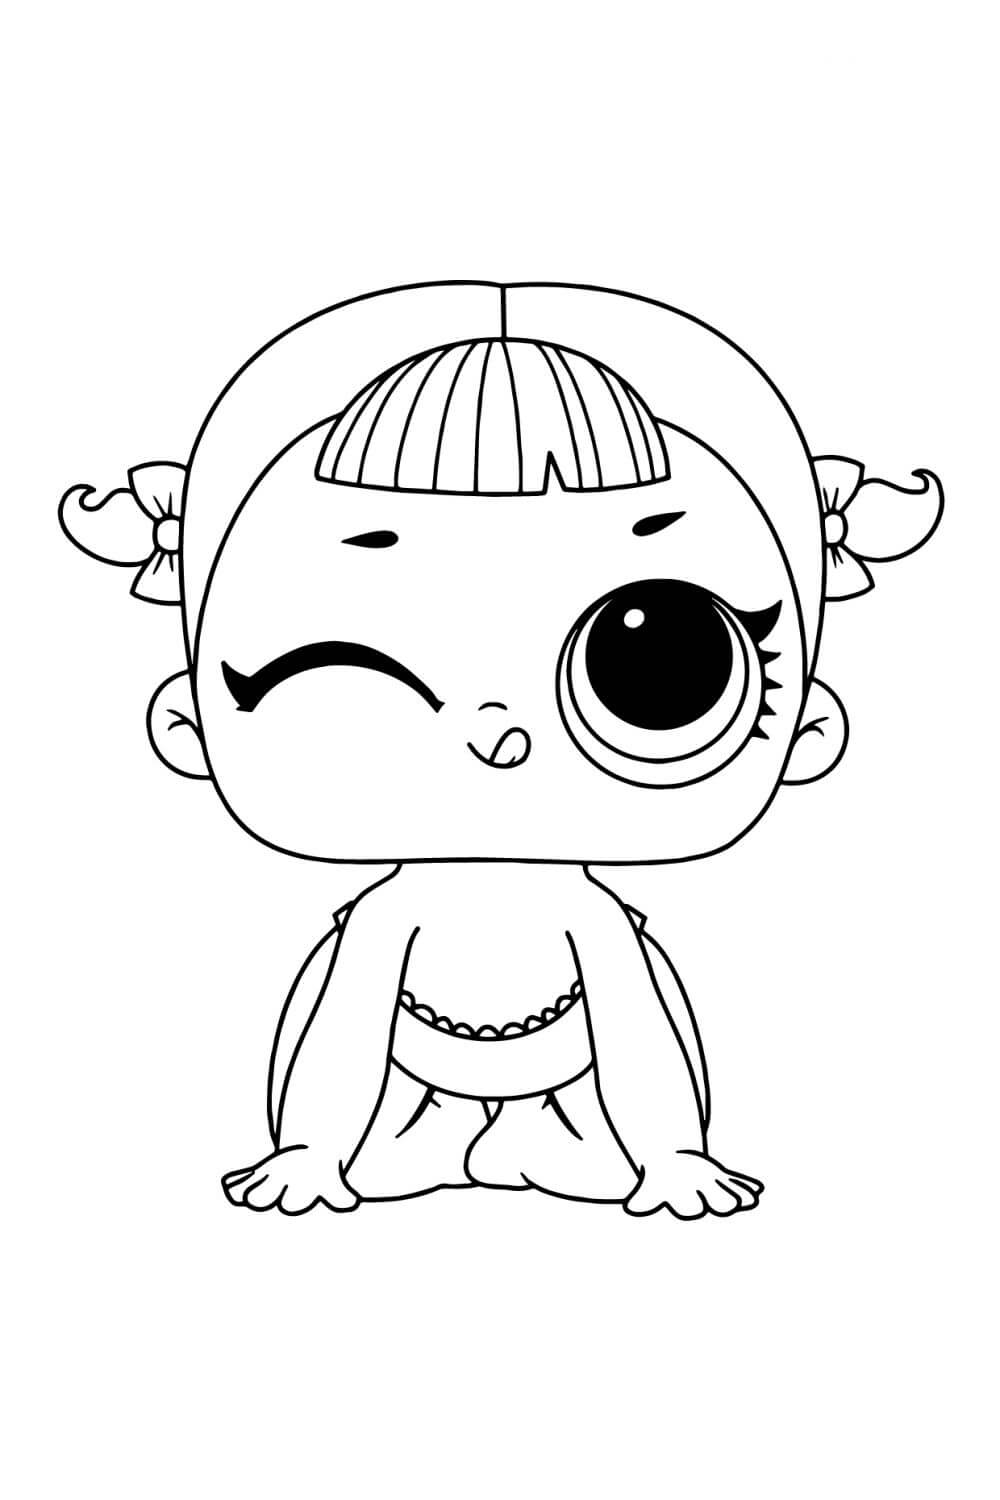 LOL Baby Unicorn Coloring Page   Free Printable Coloring Pages for ...